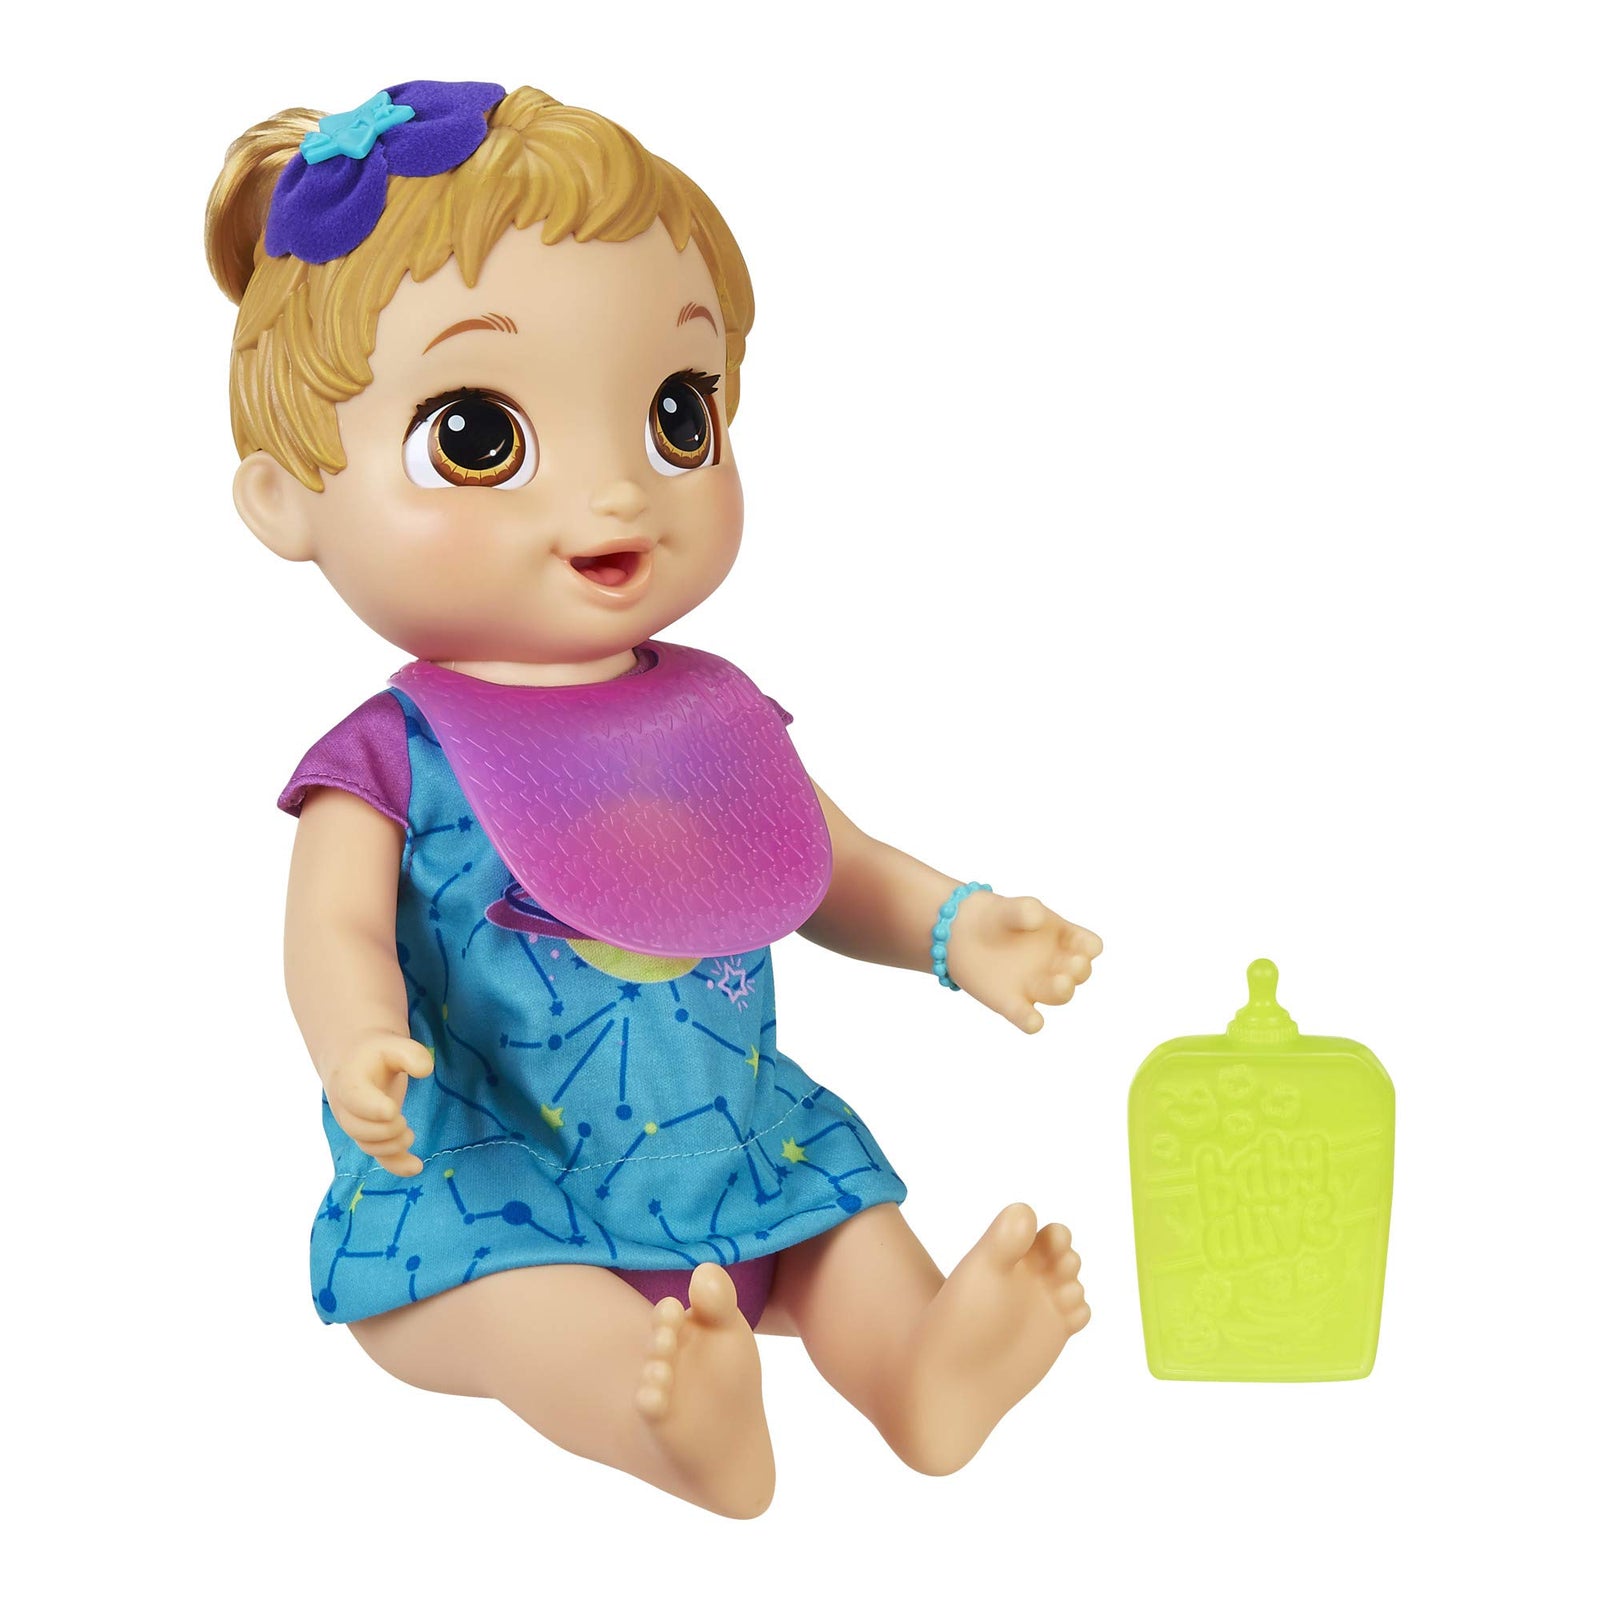 Baby Alive Baby Grows Up (Dreamy) - Shining Skylar or Star Dreamer, Growing and Talking Baby Doll, Toy with 1 Surprise Doll and 8 Accessories